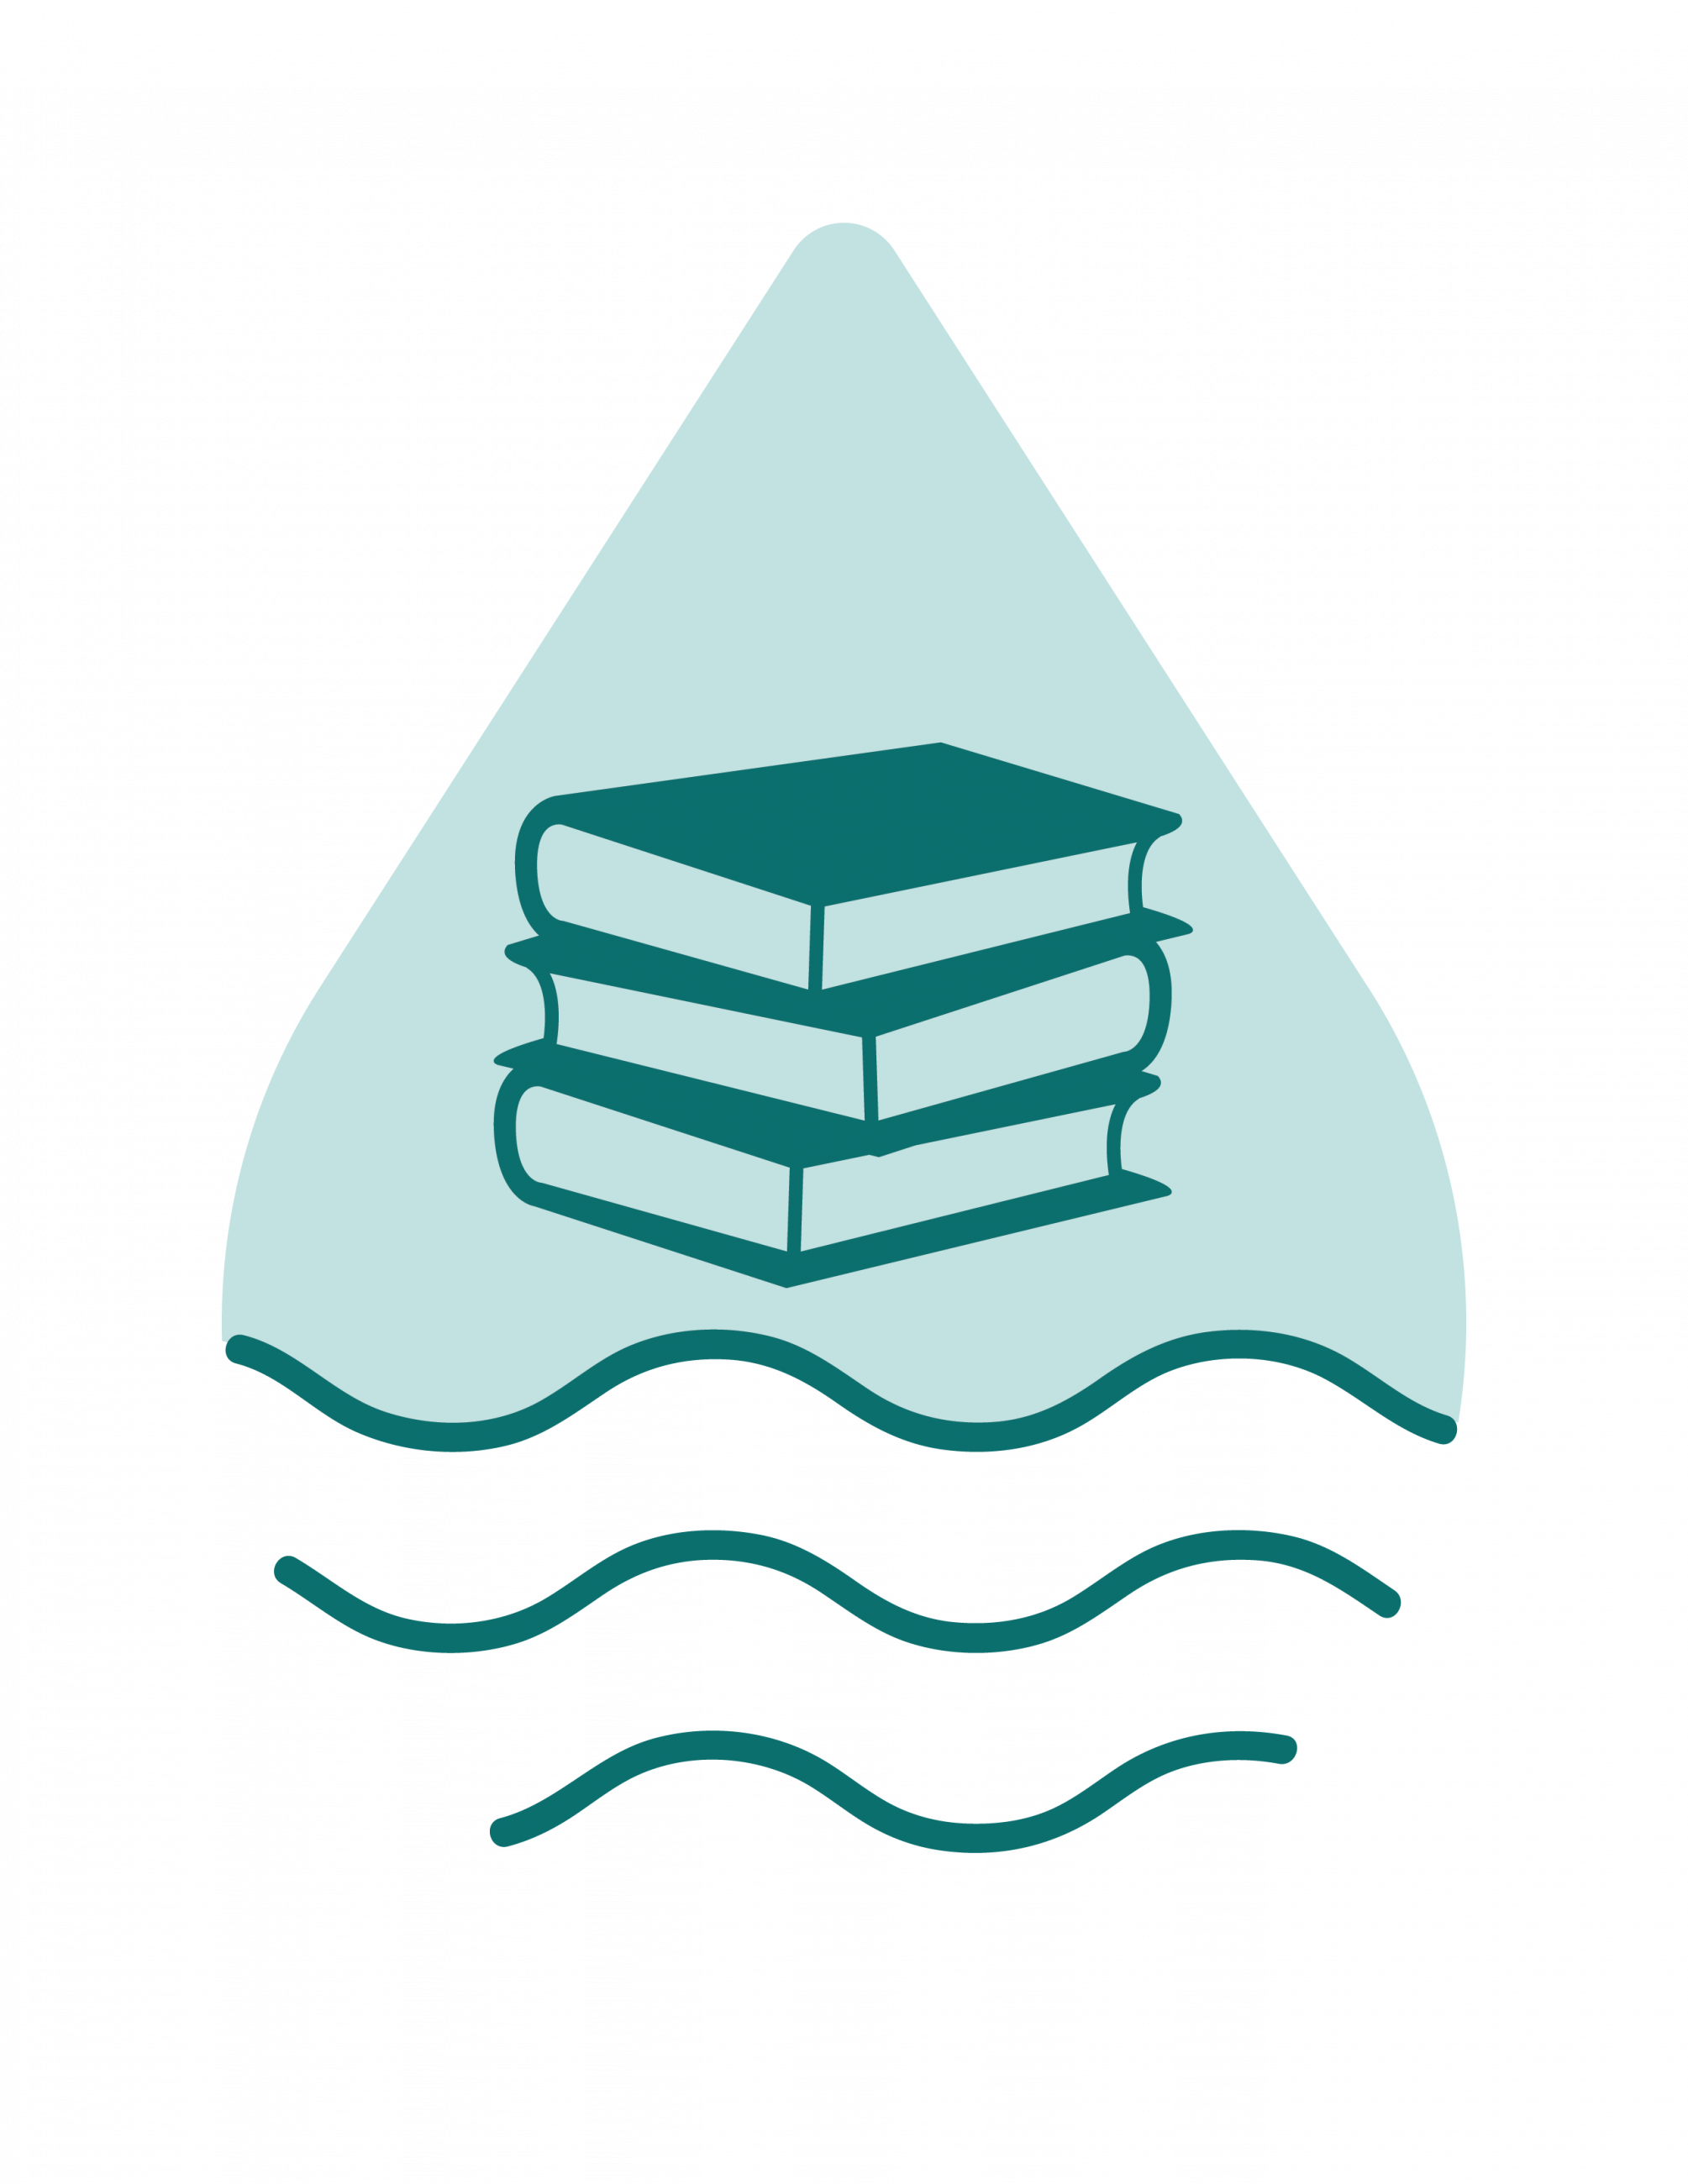 Water droplet icon. Inside the droplet are three books stacked on top of each other, with three wavy lines representing water underneath the books